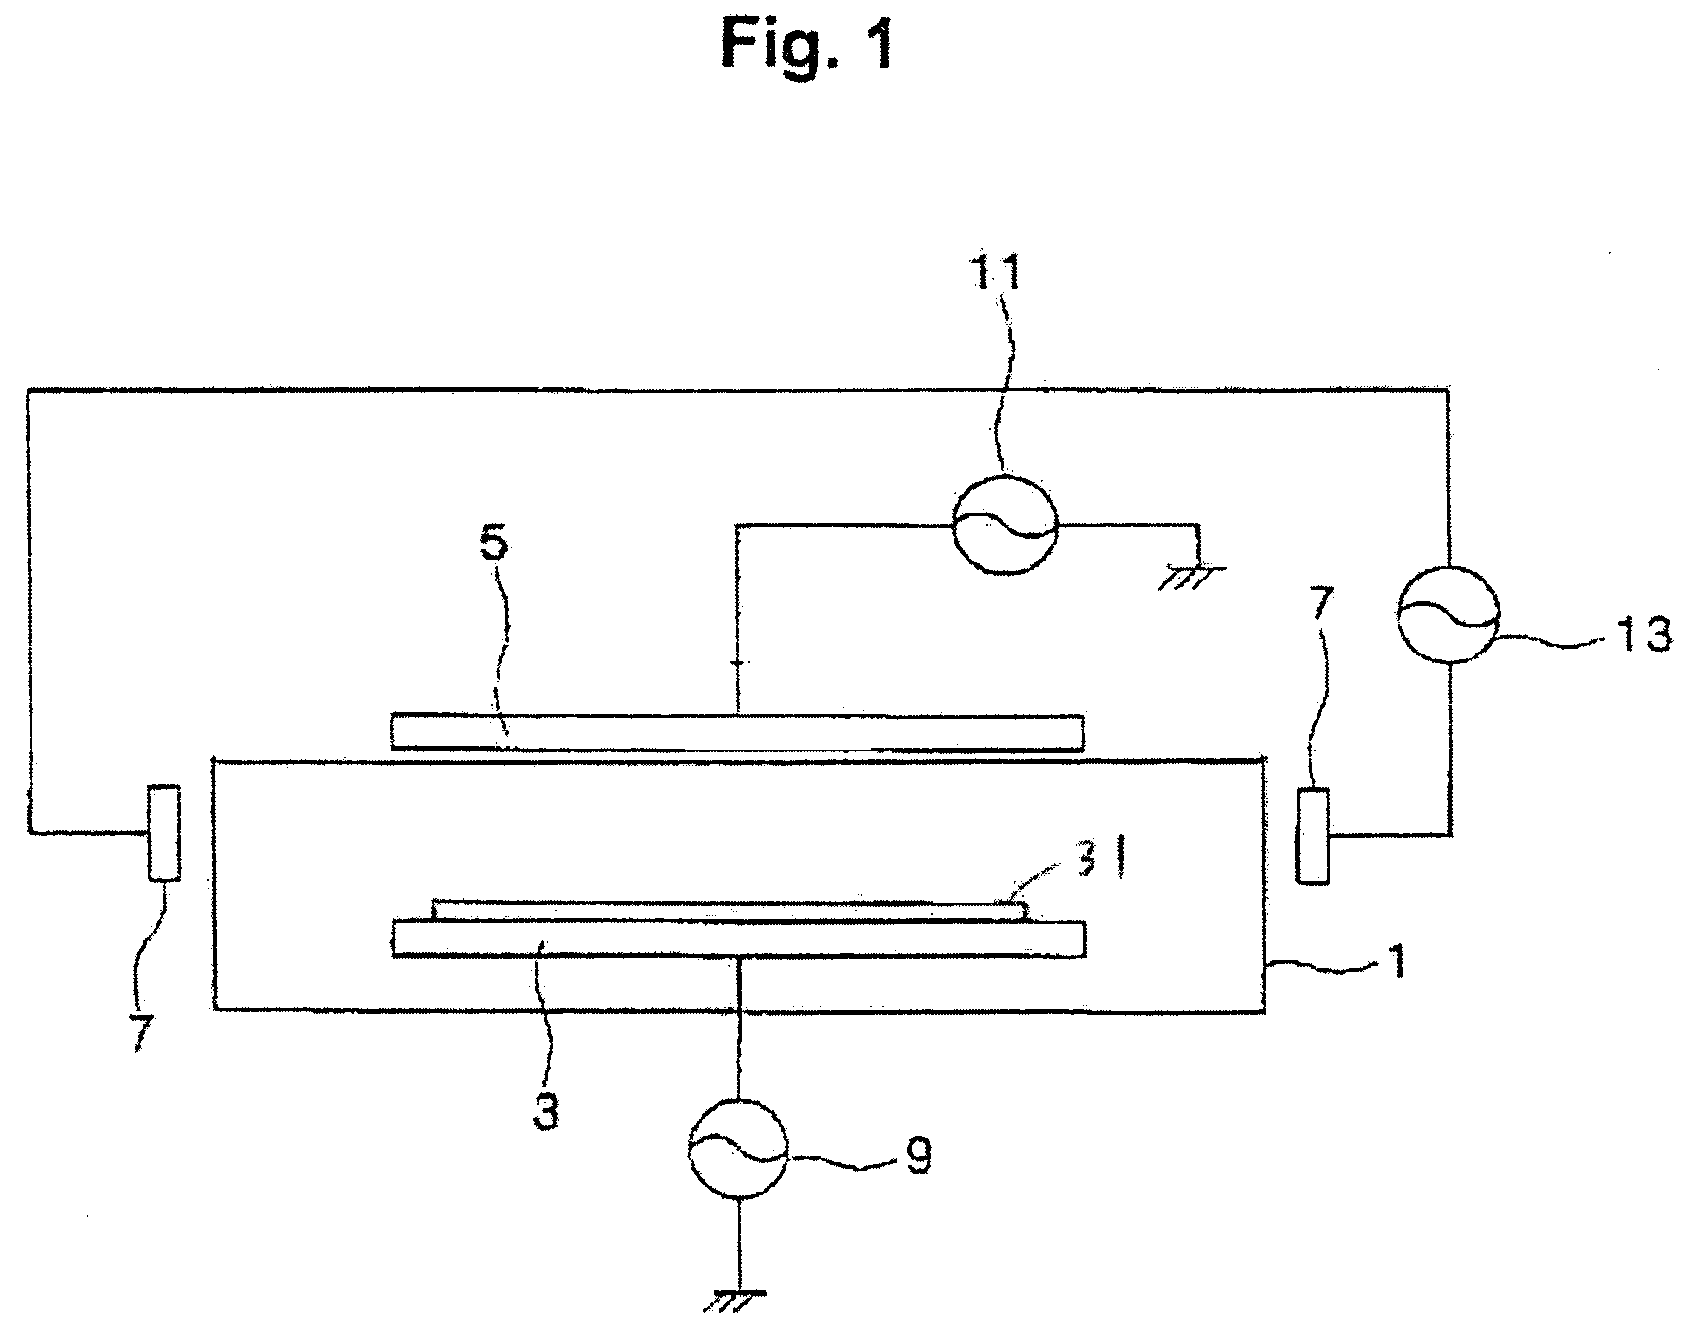 High-density plasma (HDP) chemical vapor deposition (CVD) methods and methods of fabricating semiconductor devices employing the same